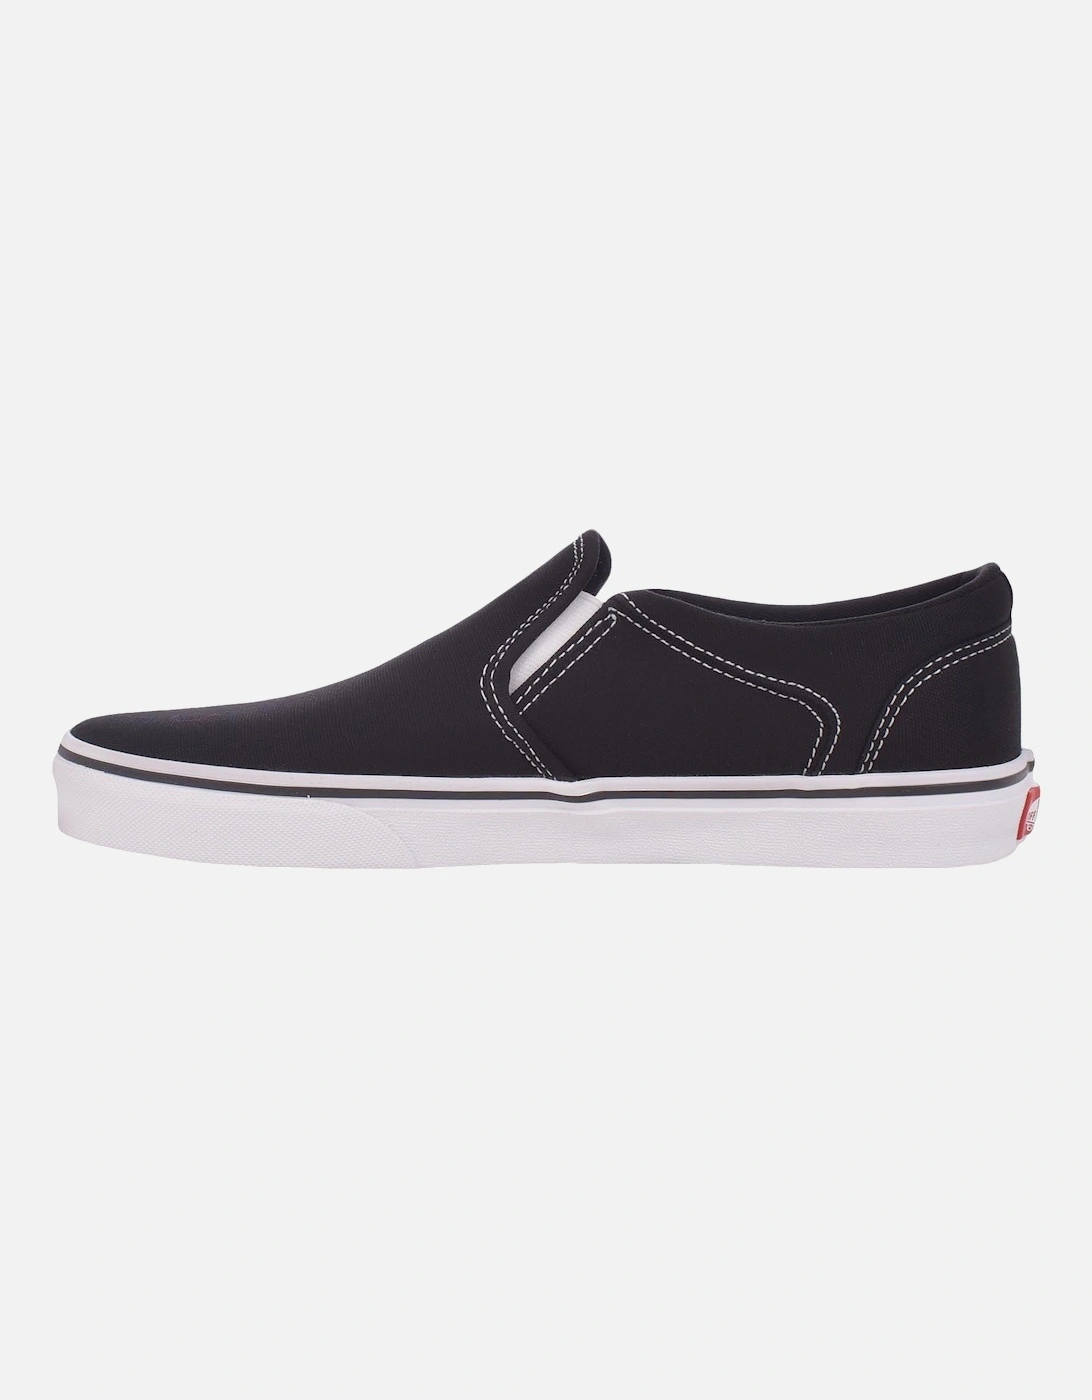 Mens Asher Canvas Trainers - Black/White